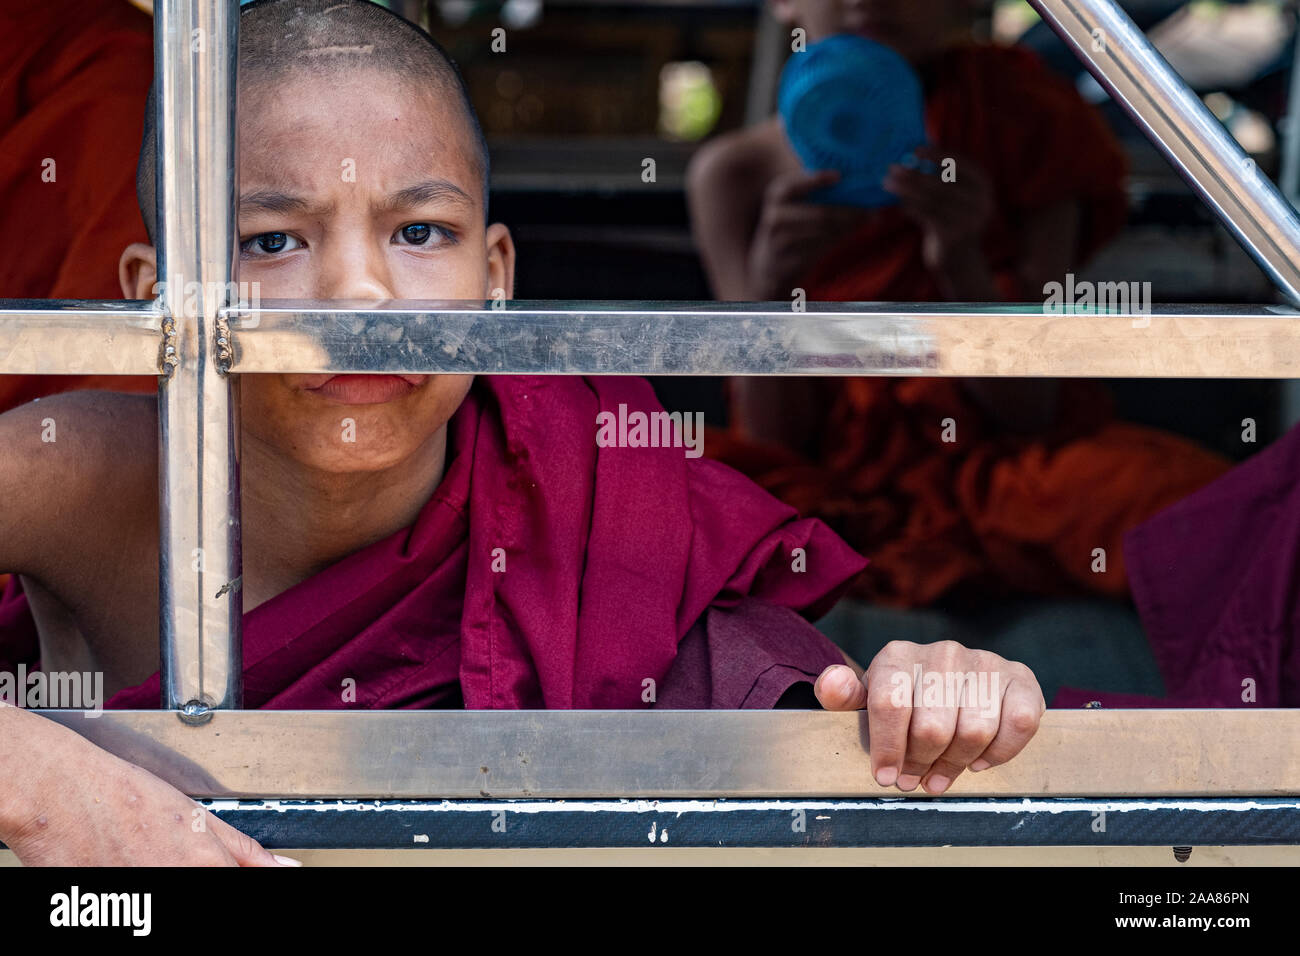 A young Buddhist monk dressed in a scarlet robe peers out through window slats from the back of a local jitney in Bagan (Pagan), Myanmar (Burma) Stock Photo